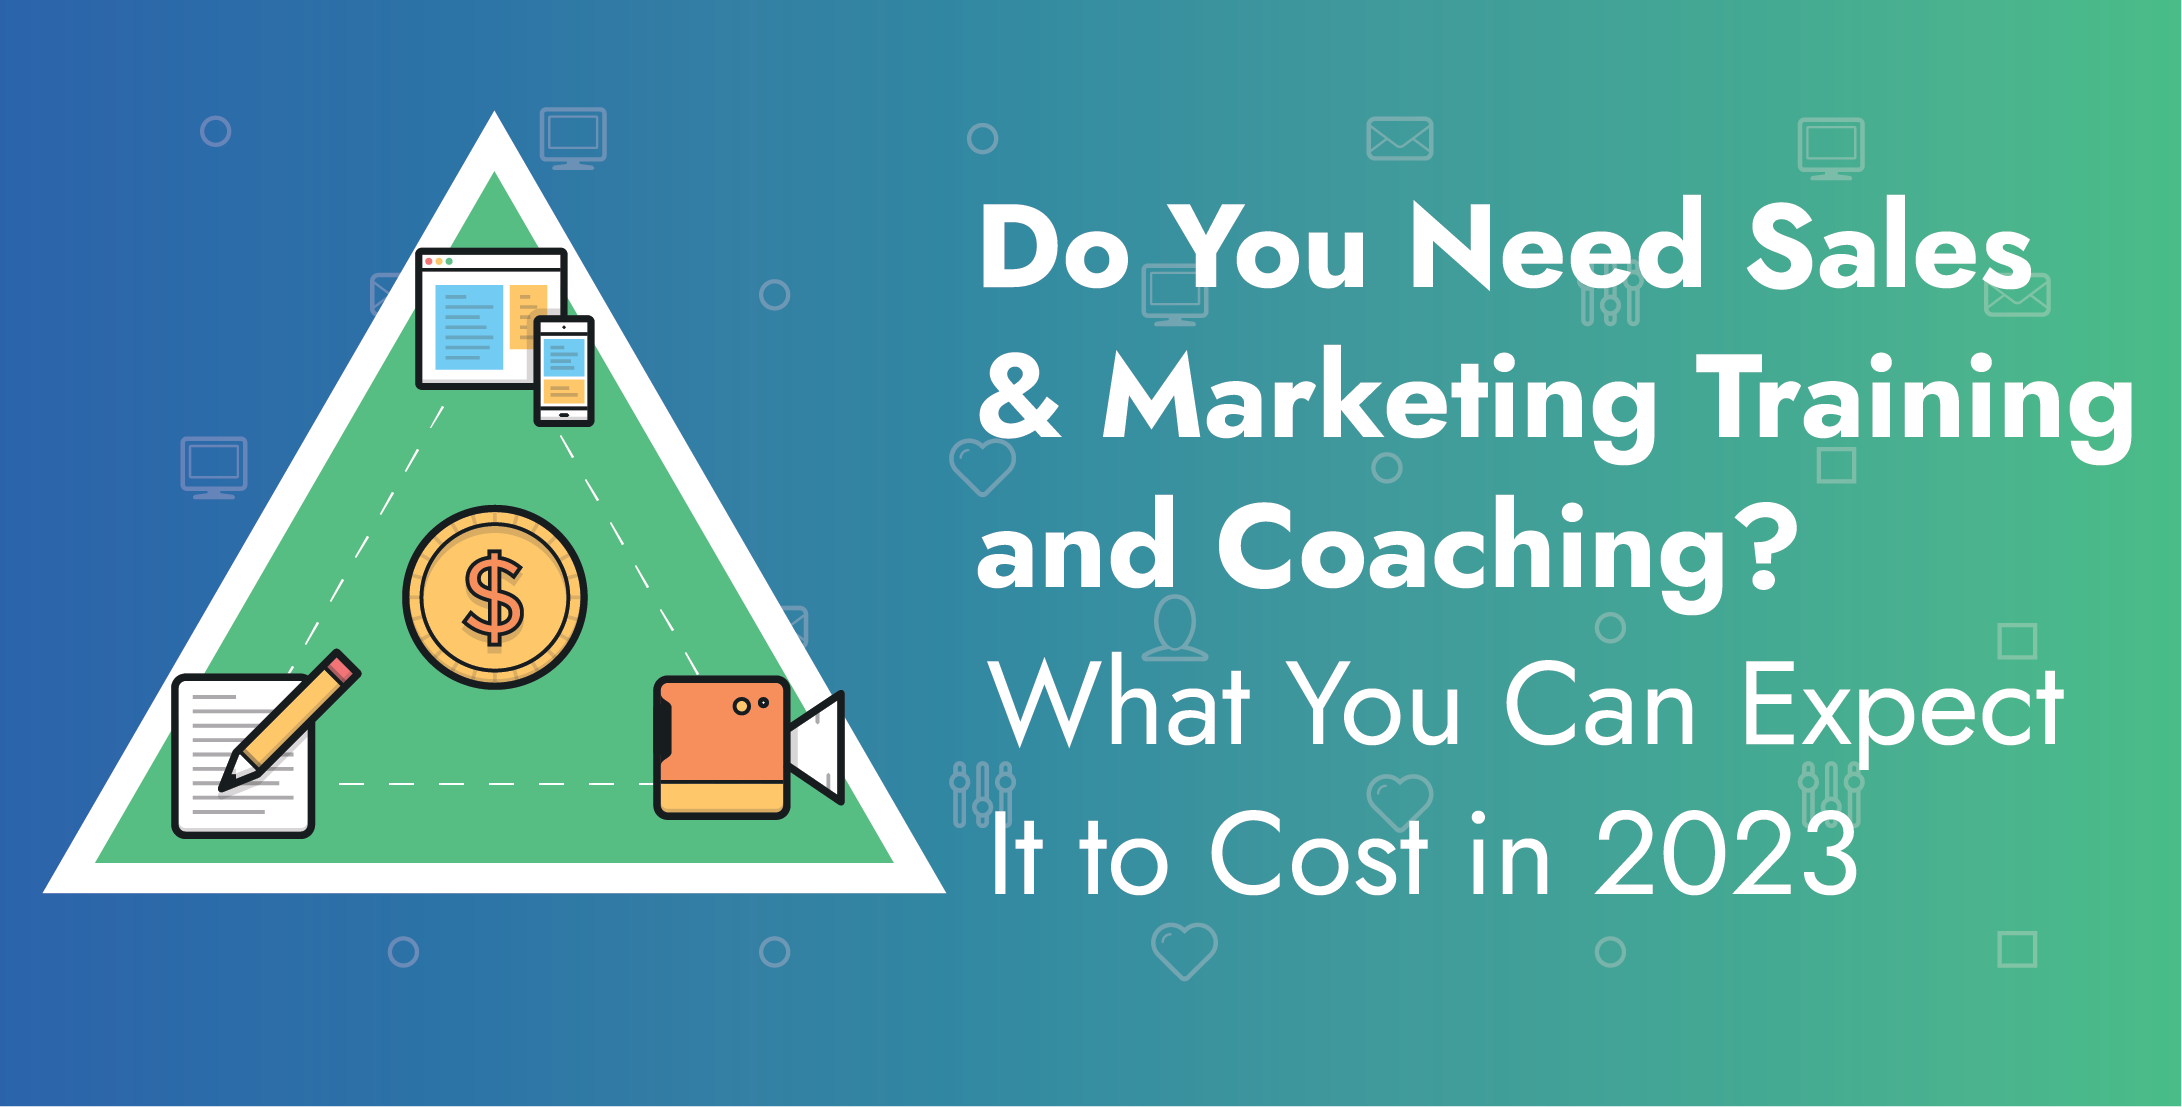 Do you need sales and marketing training? What you can expect it to cost in 2023.